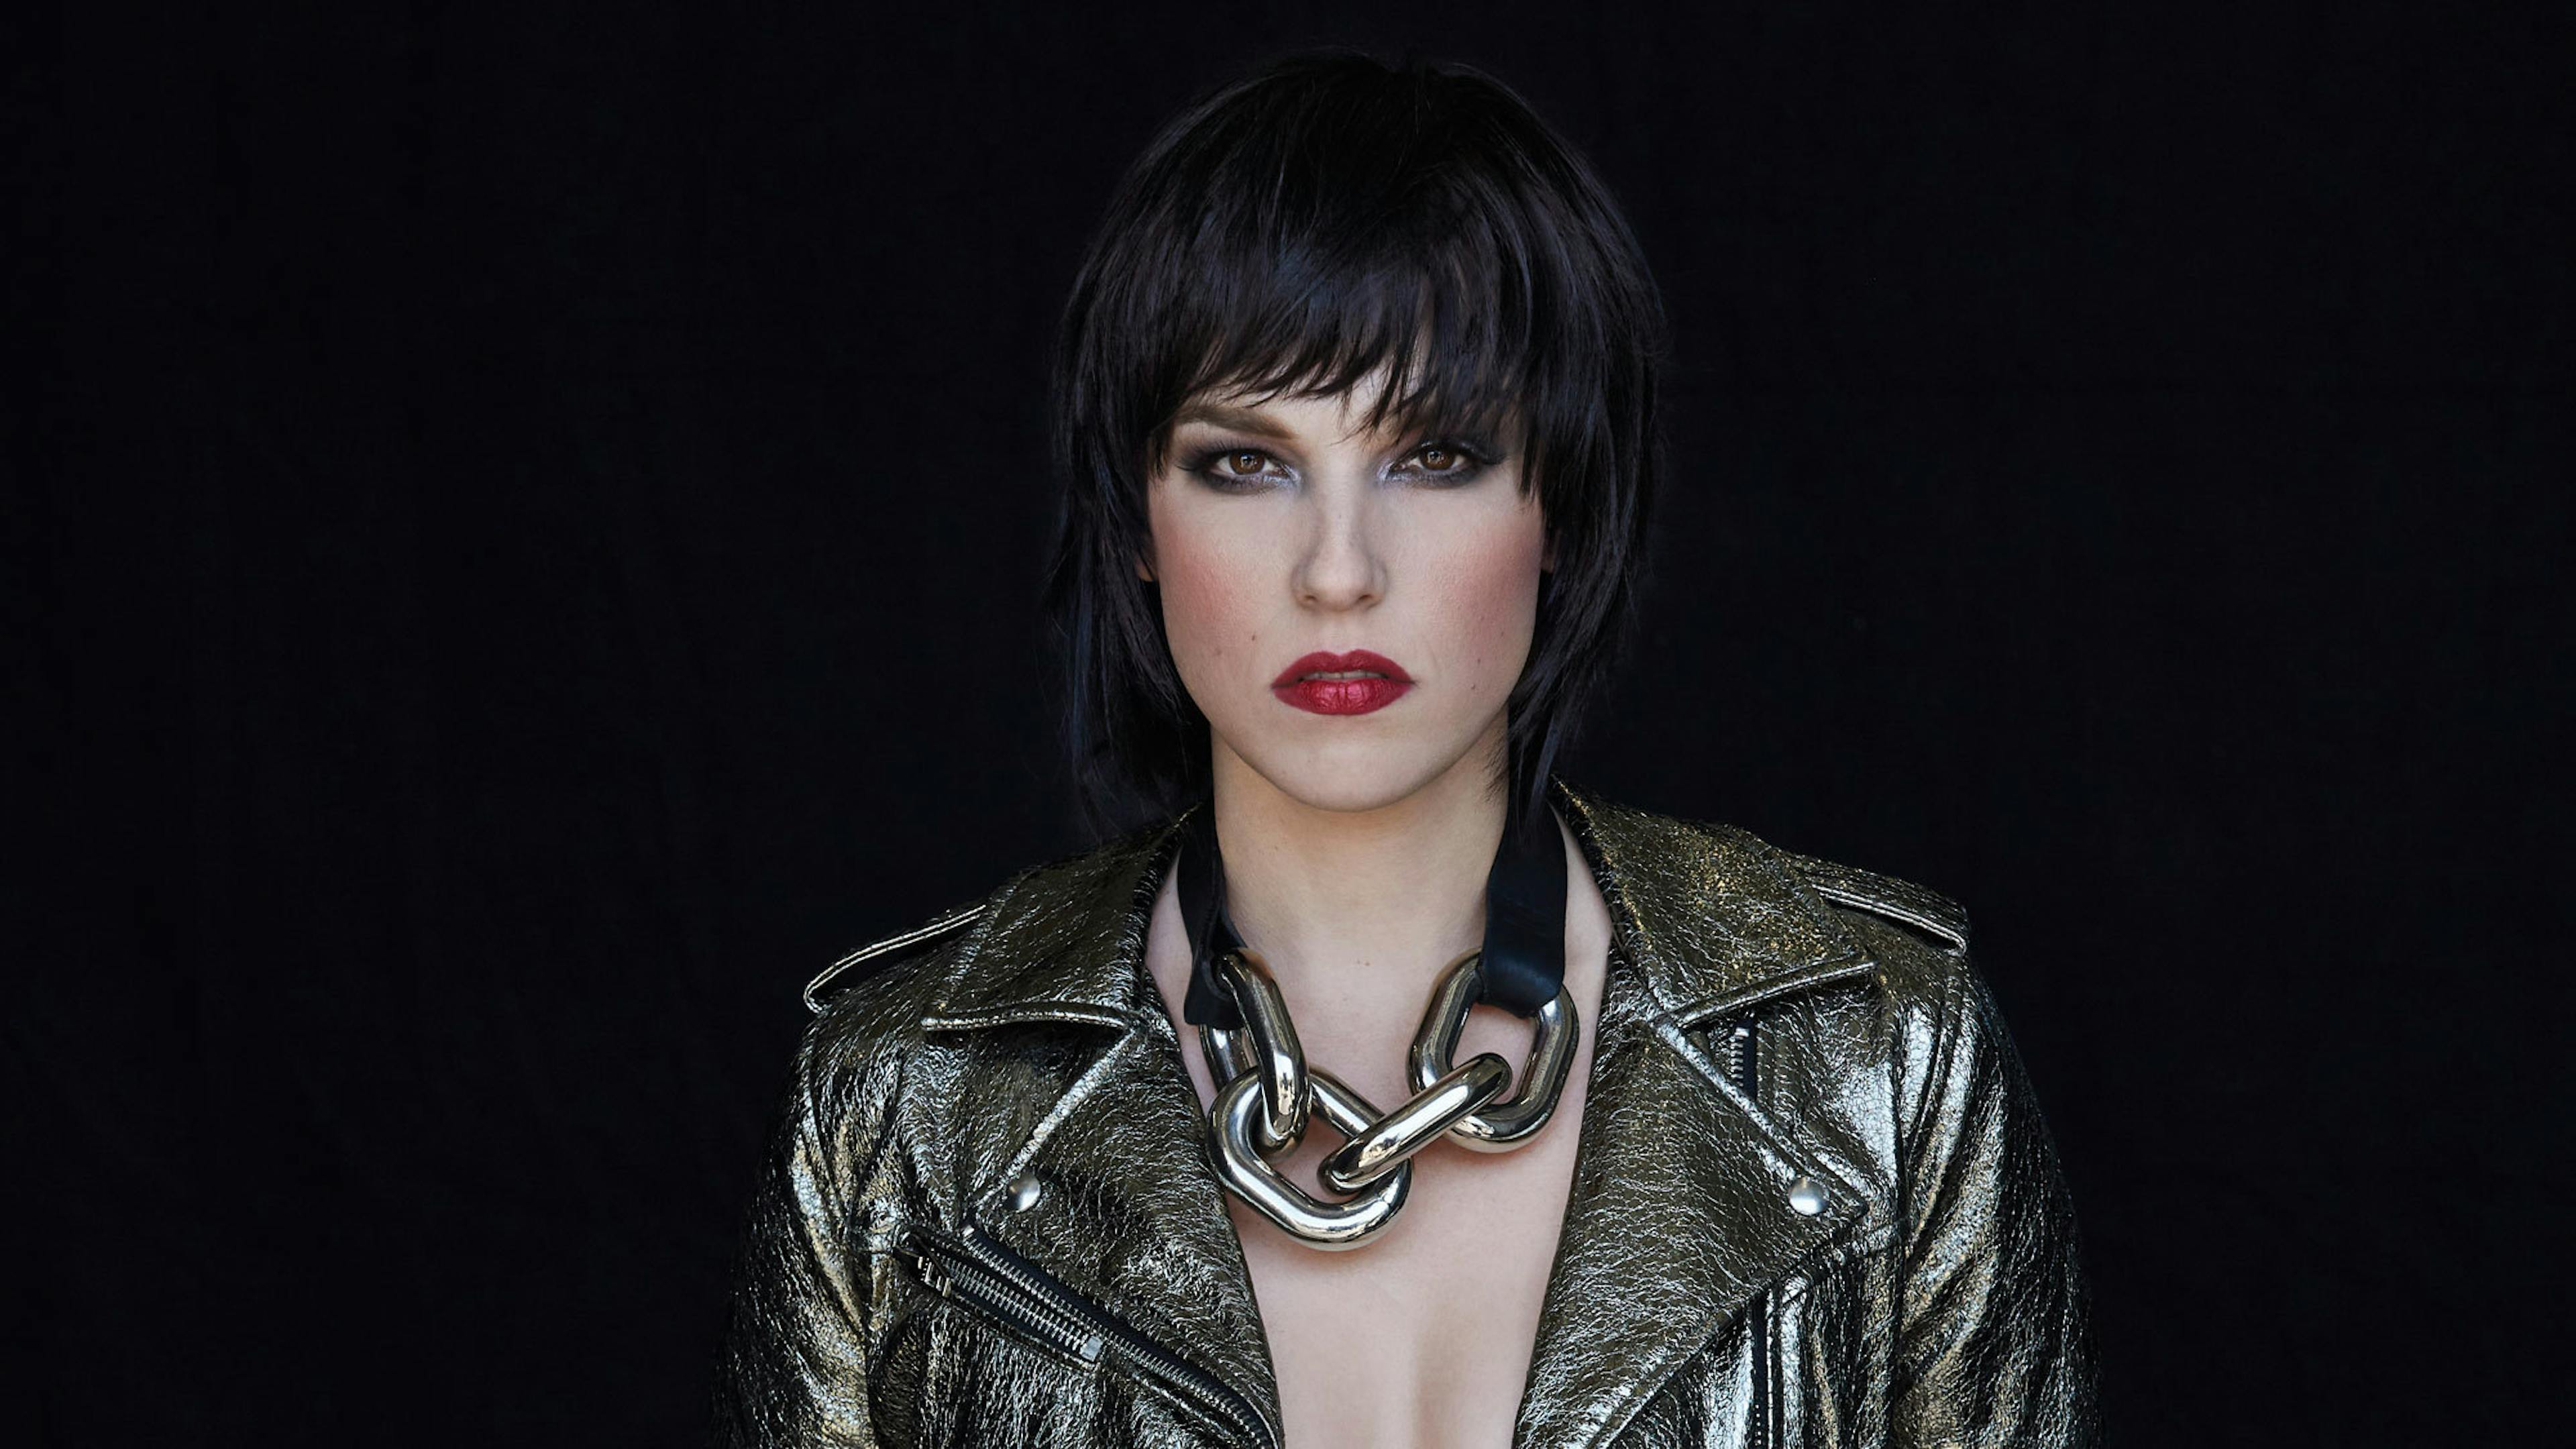 Halestorm's Lzzy Hale On Standing For Equality: "I Will Not Shut Up"